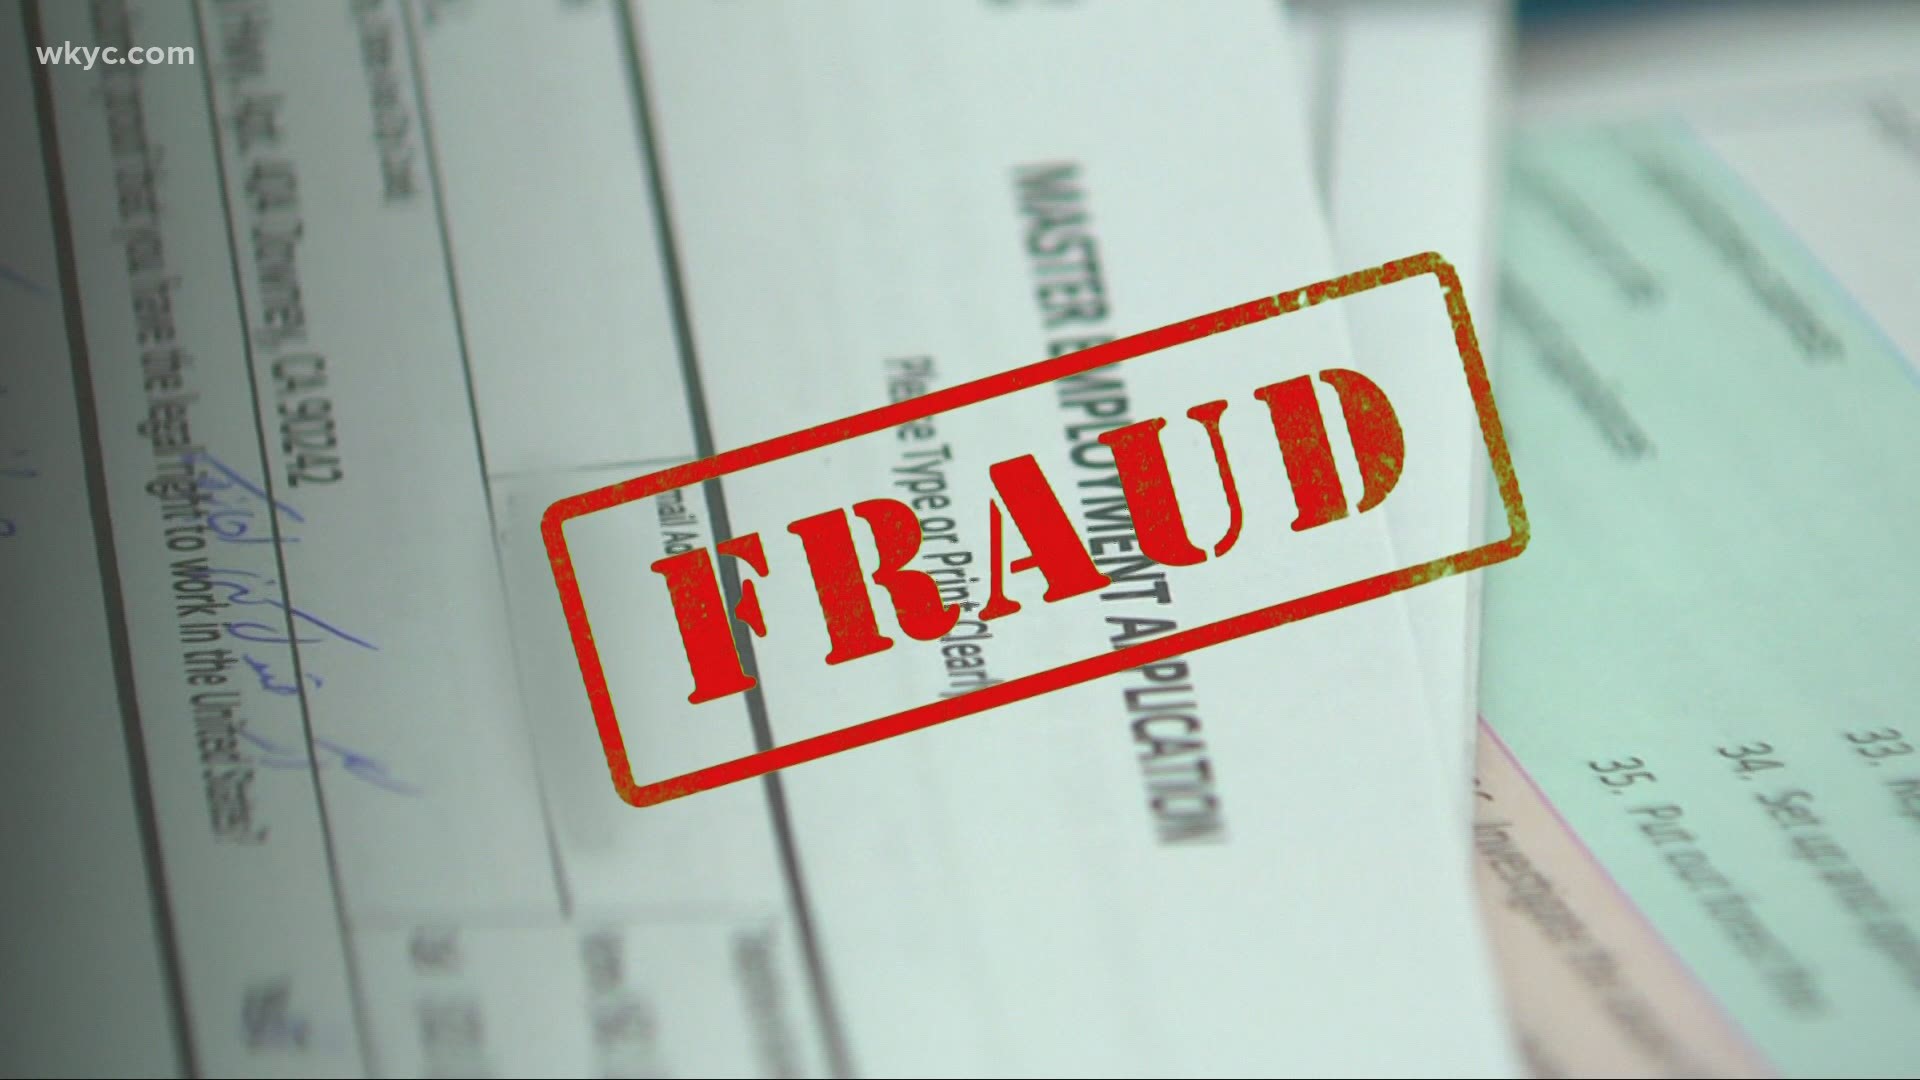 February 22, 2021: Here are three steps you can take right now if you believe you're a victim of fraud in Ohio's unemployment system.